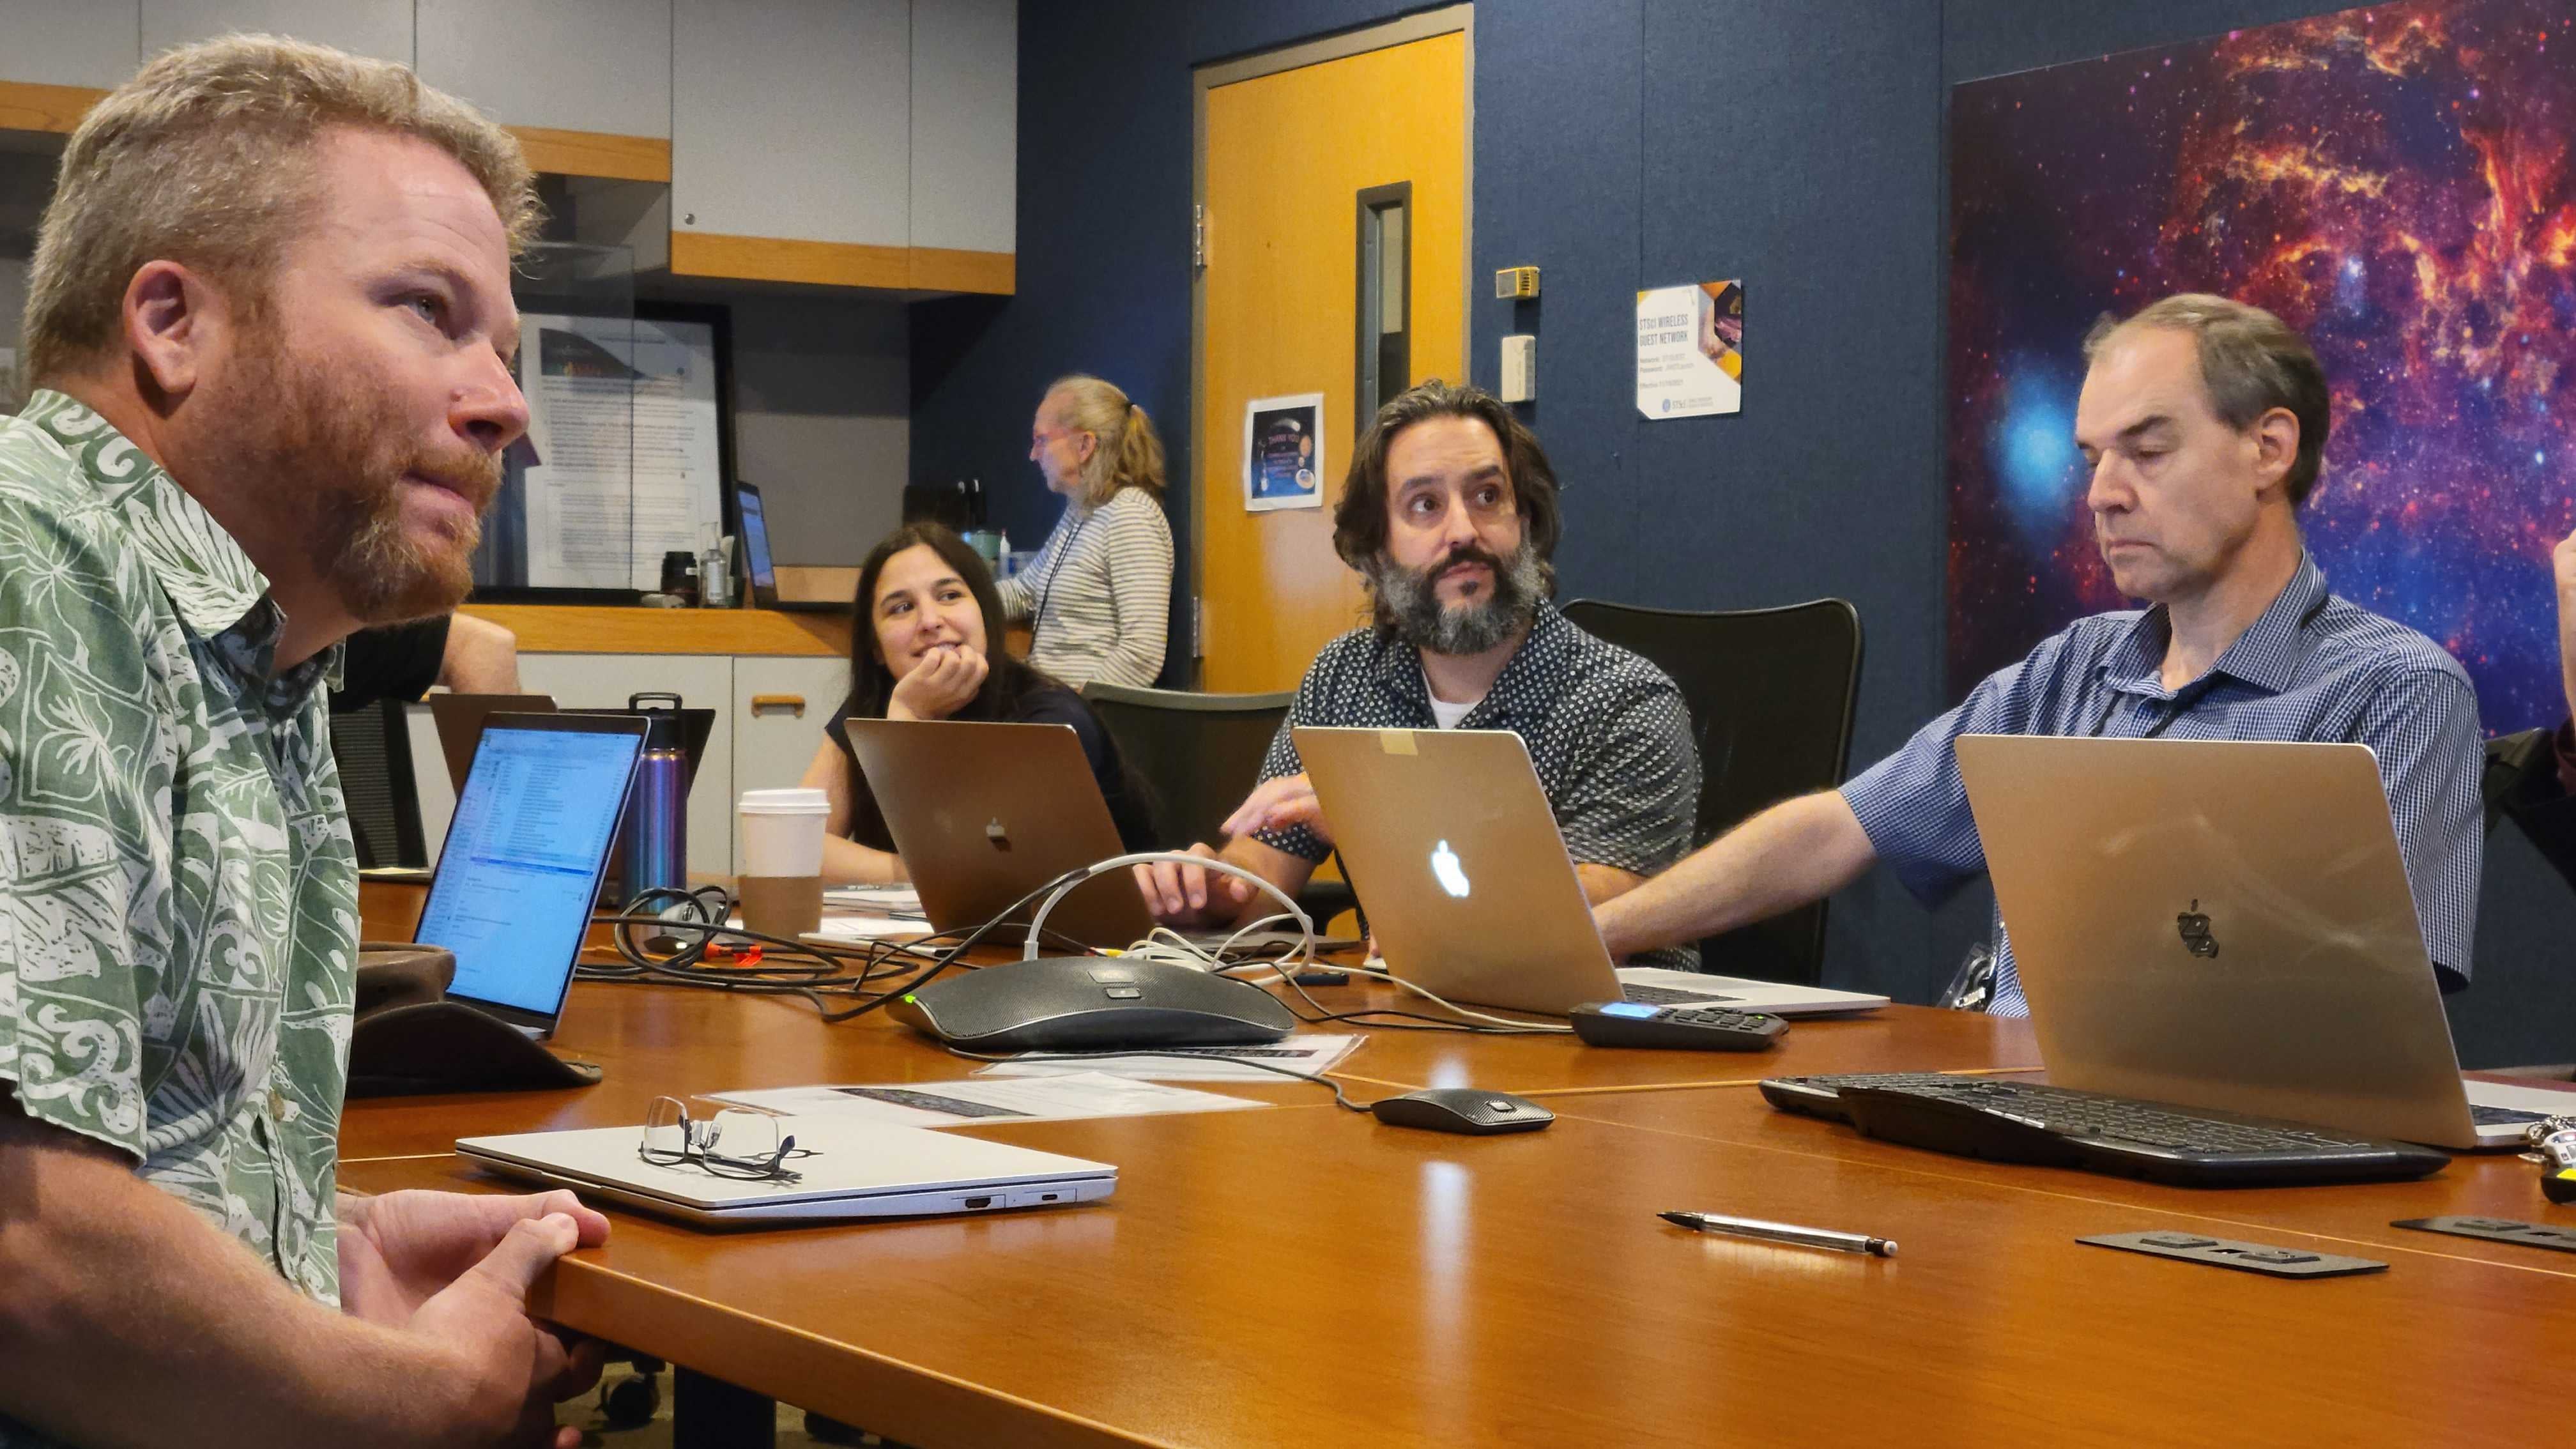 Astronomer Karl Gordon, science visuals developers Alyssa Pagan and Joseph DePasquale, and astrophysicist Anton Koekemoer discuss Webb Telescope image processing at the Space Telescope Science Institute in Baltimore.